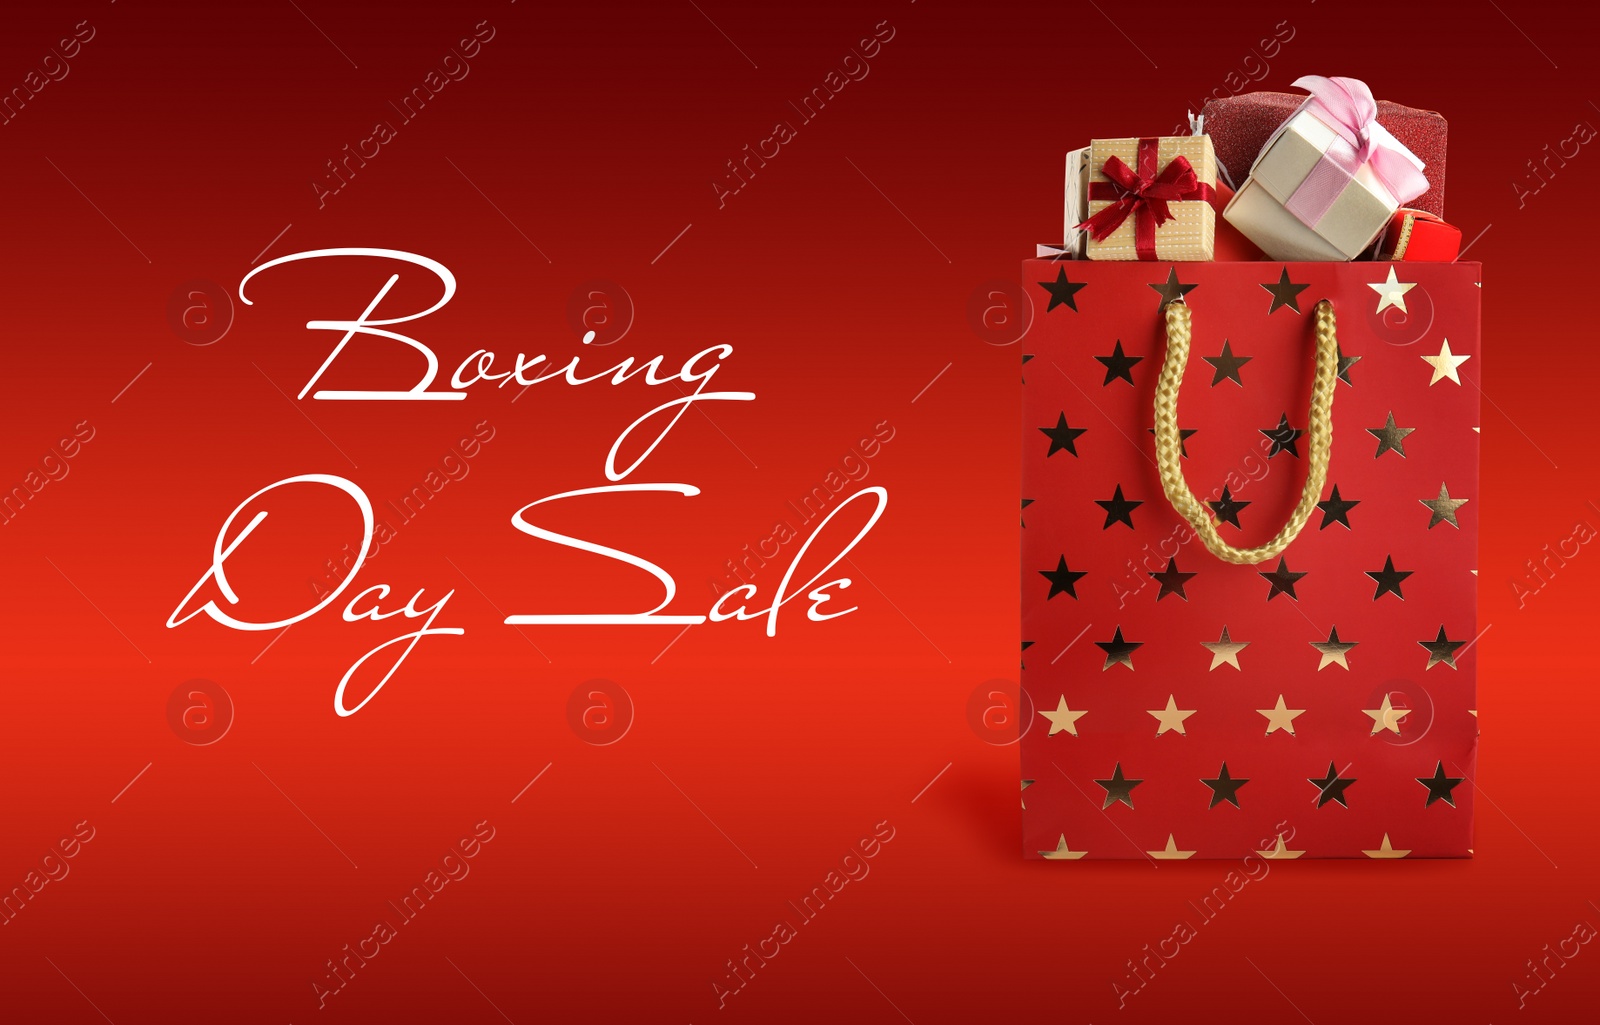 Image of Boxing day sale. Shopping bag with gifts on red background